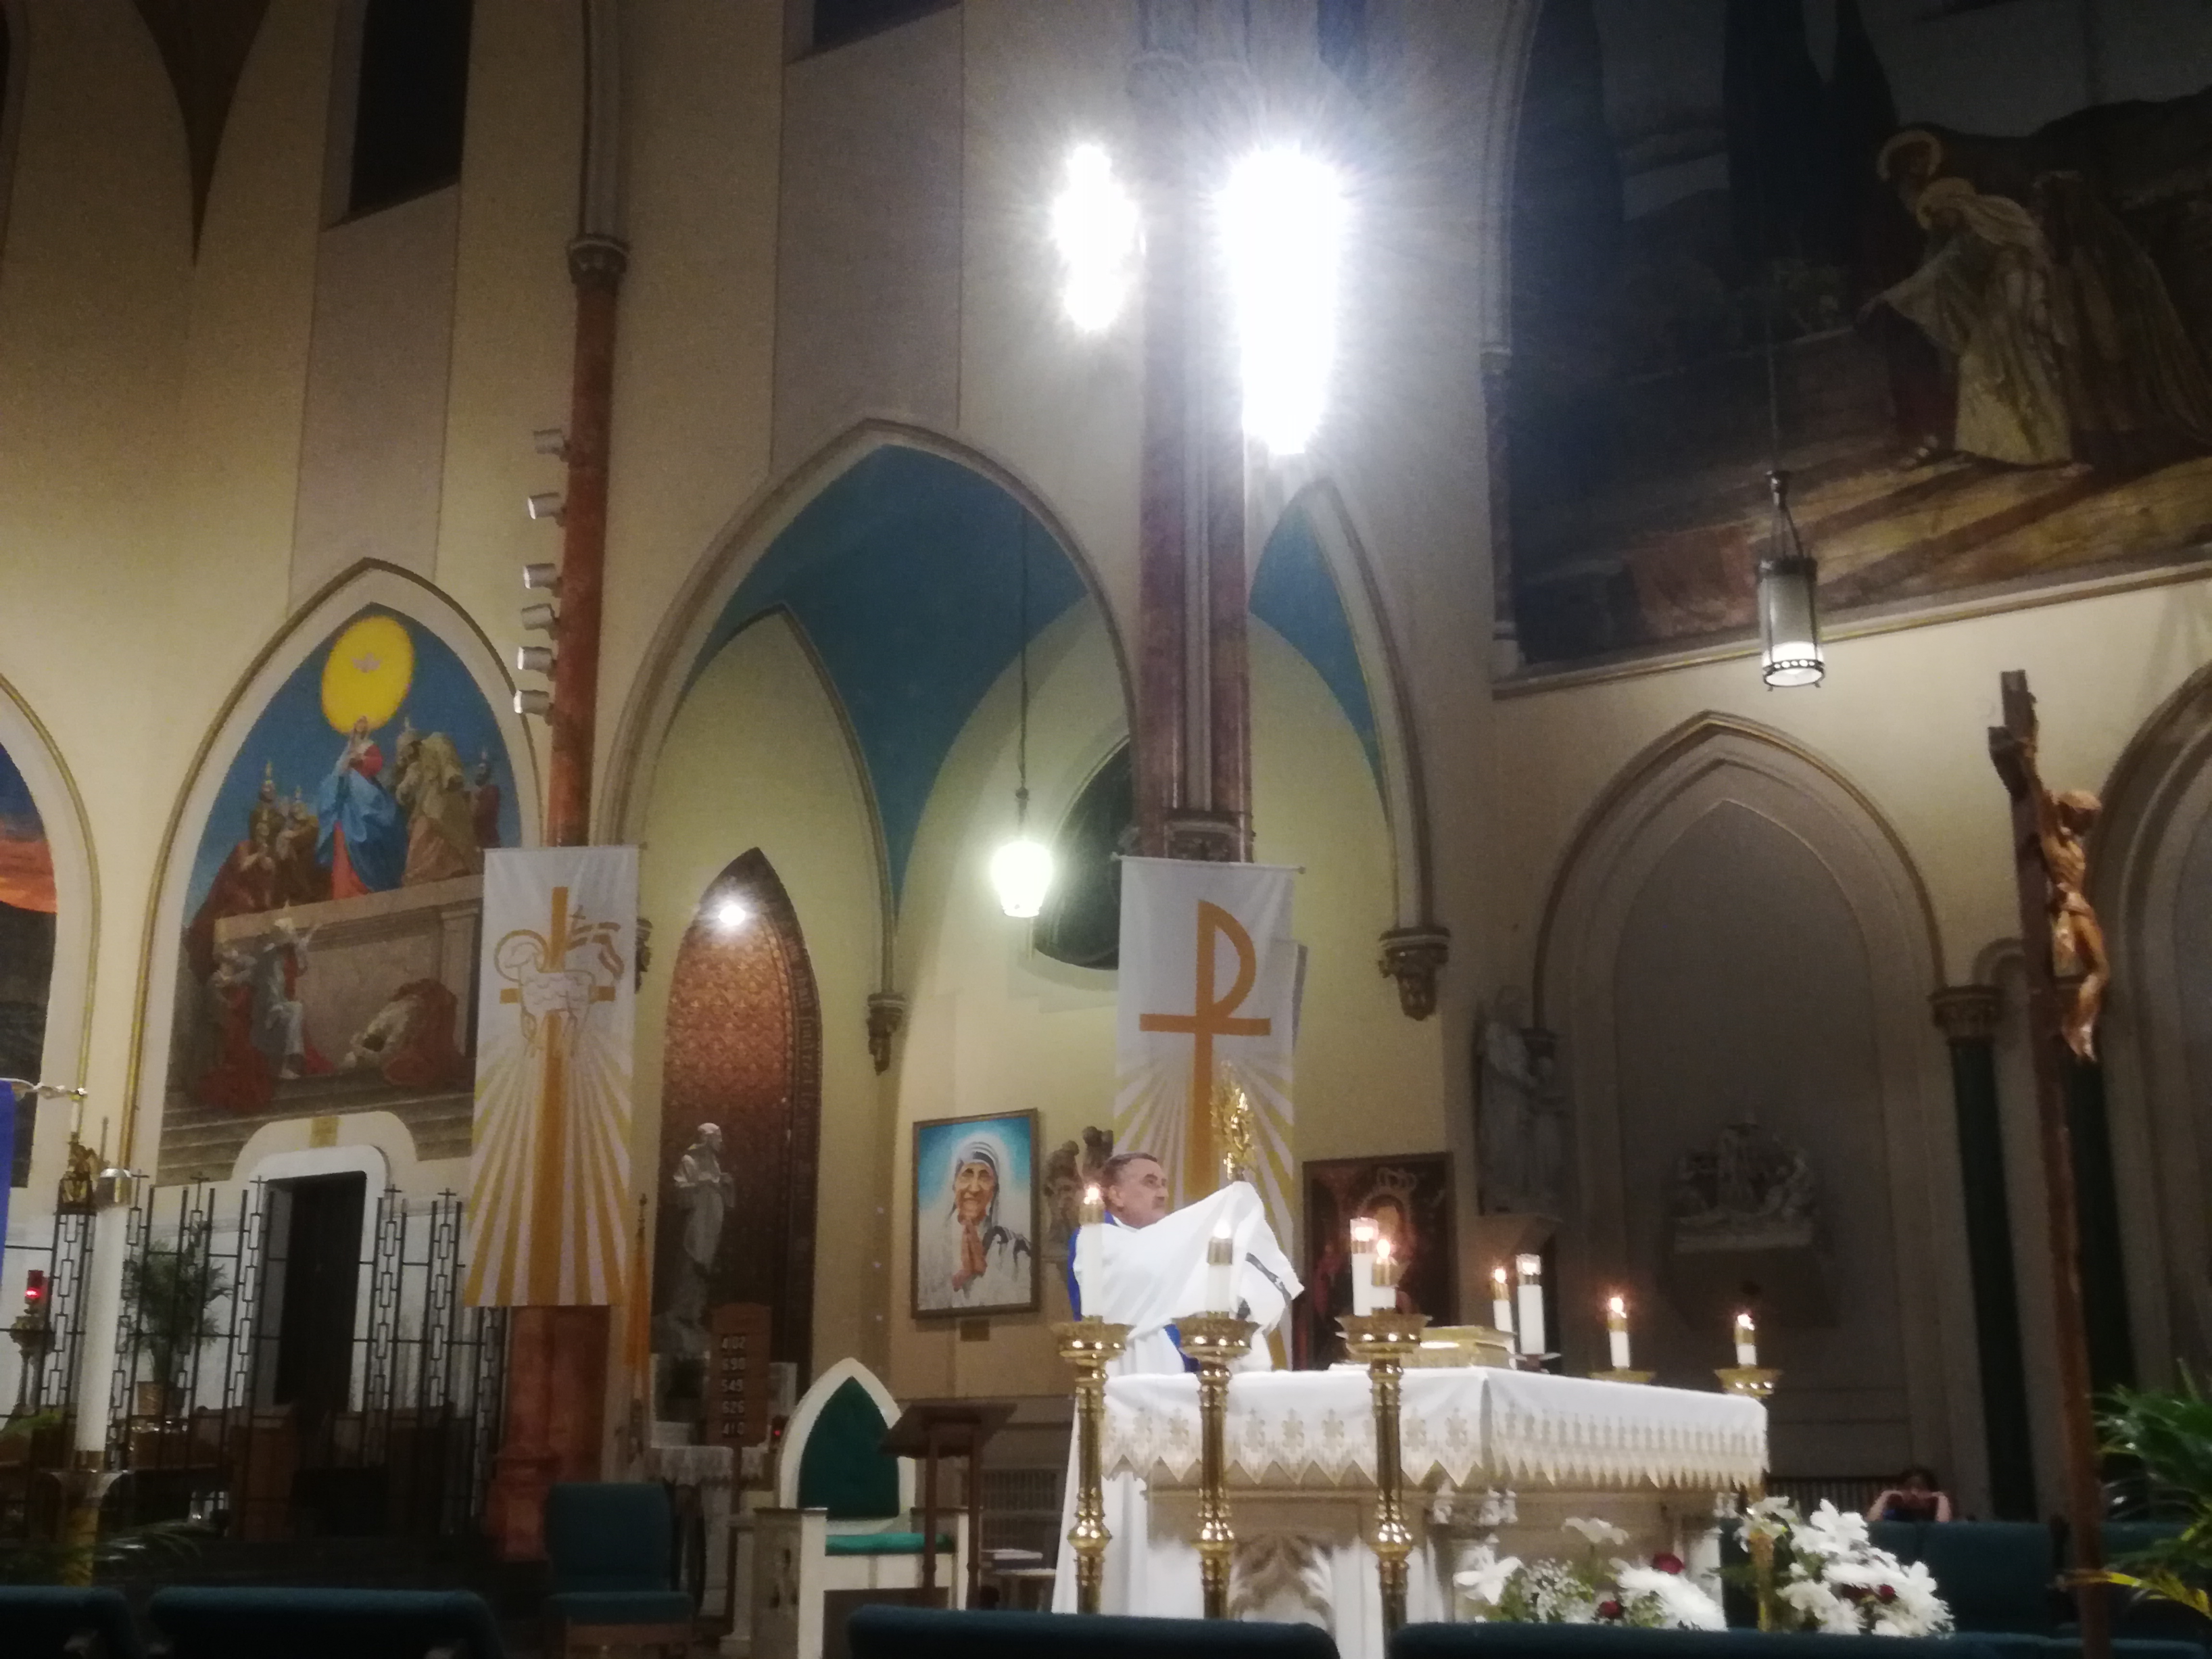 A priest is standing in front of the altar.